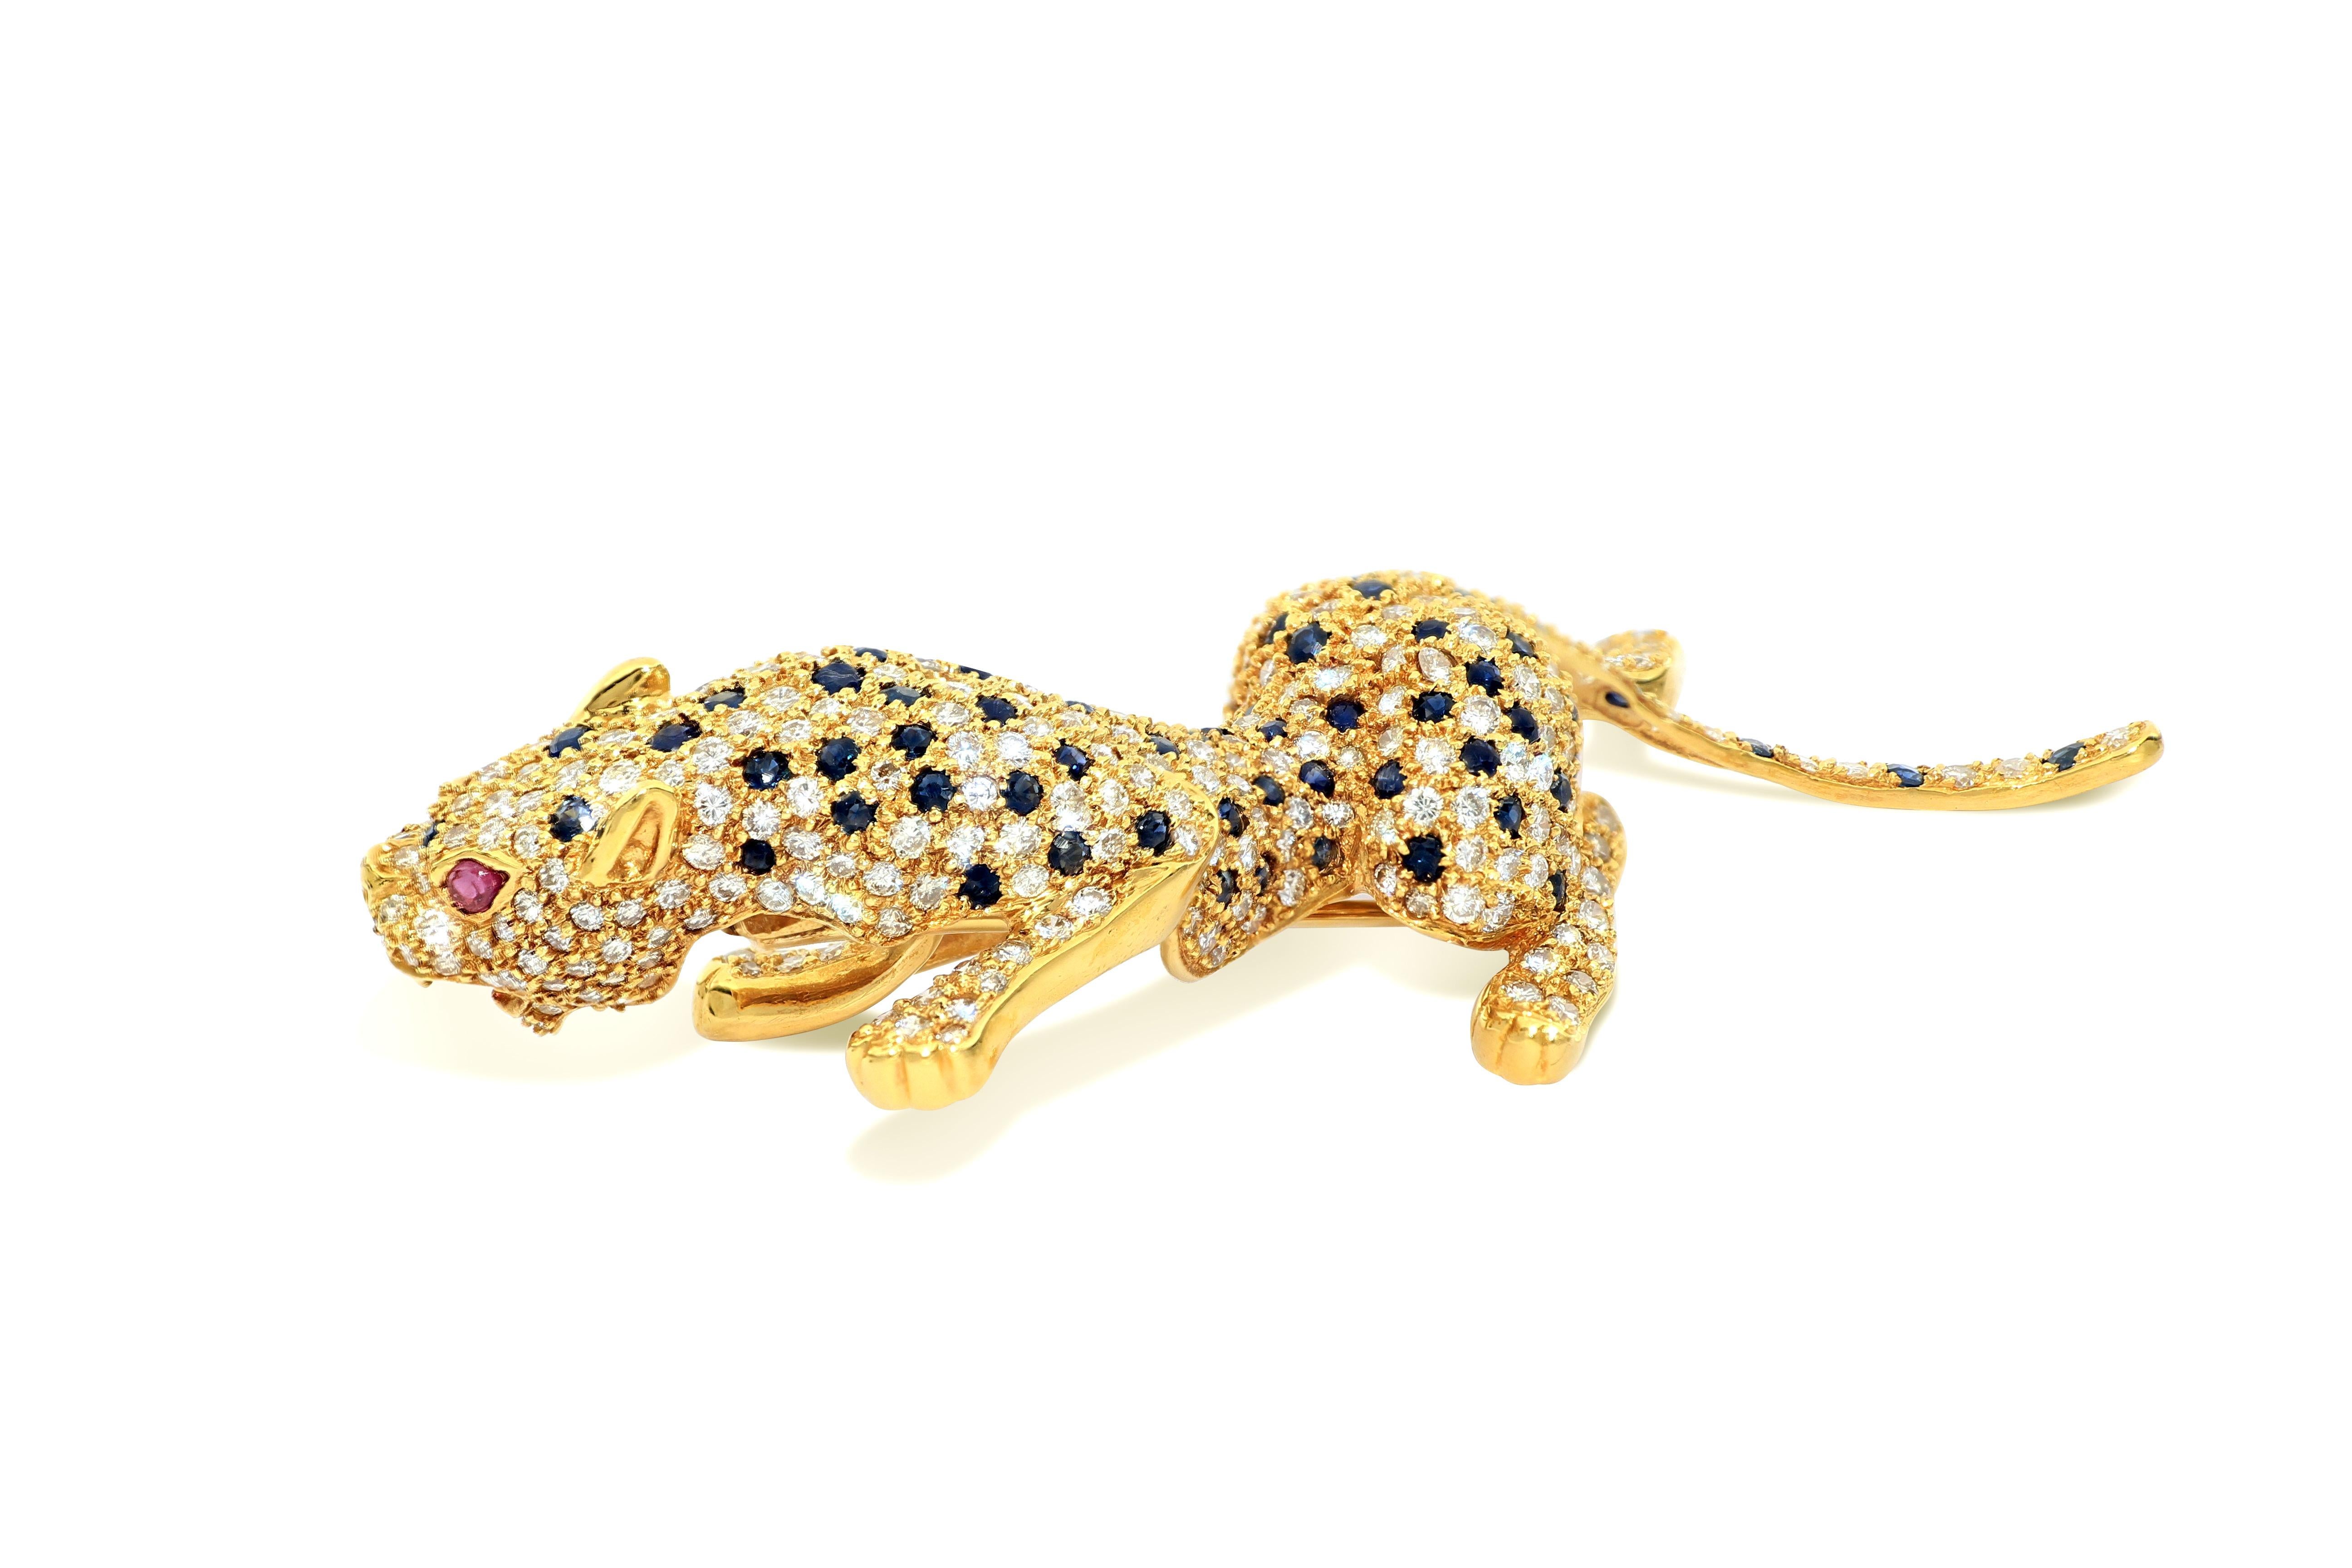 Brilliant Cut 18K Gold Diamond Panther Brooch with Sapphires and Rubies  For Sale